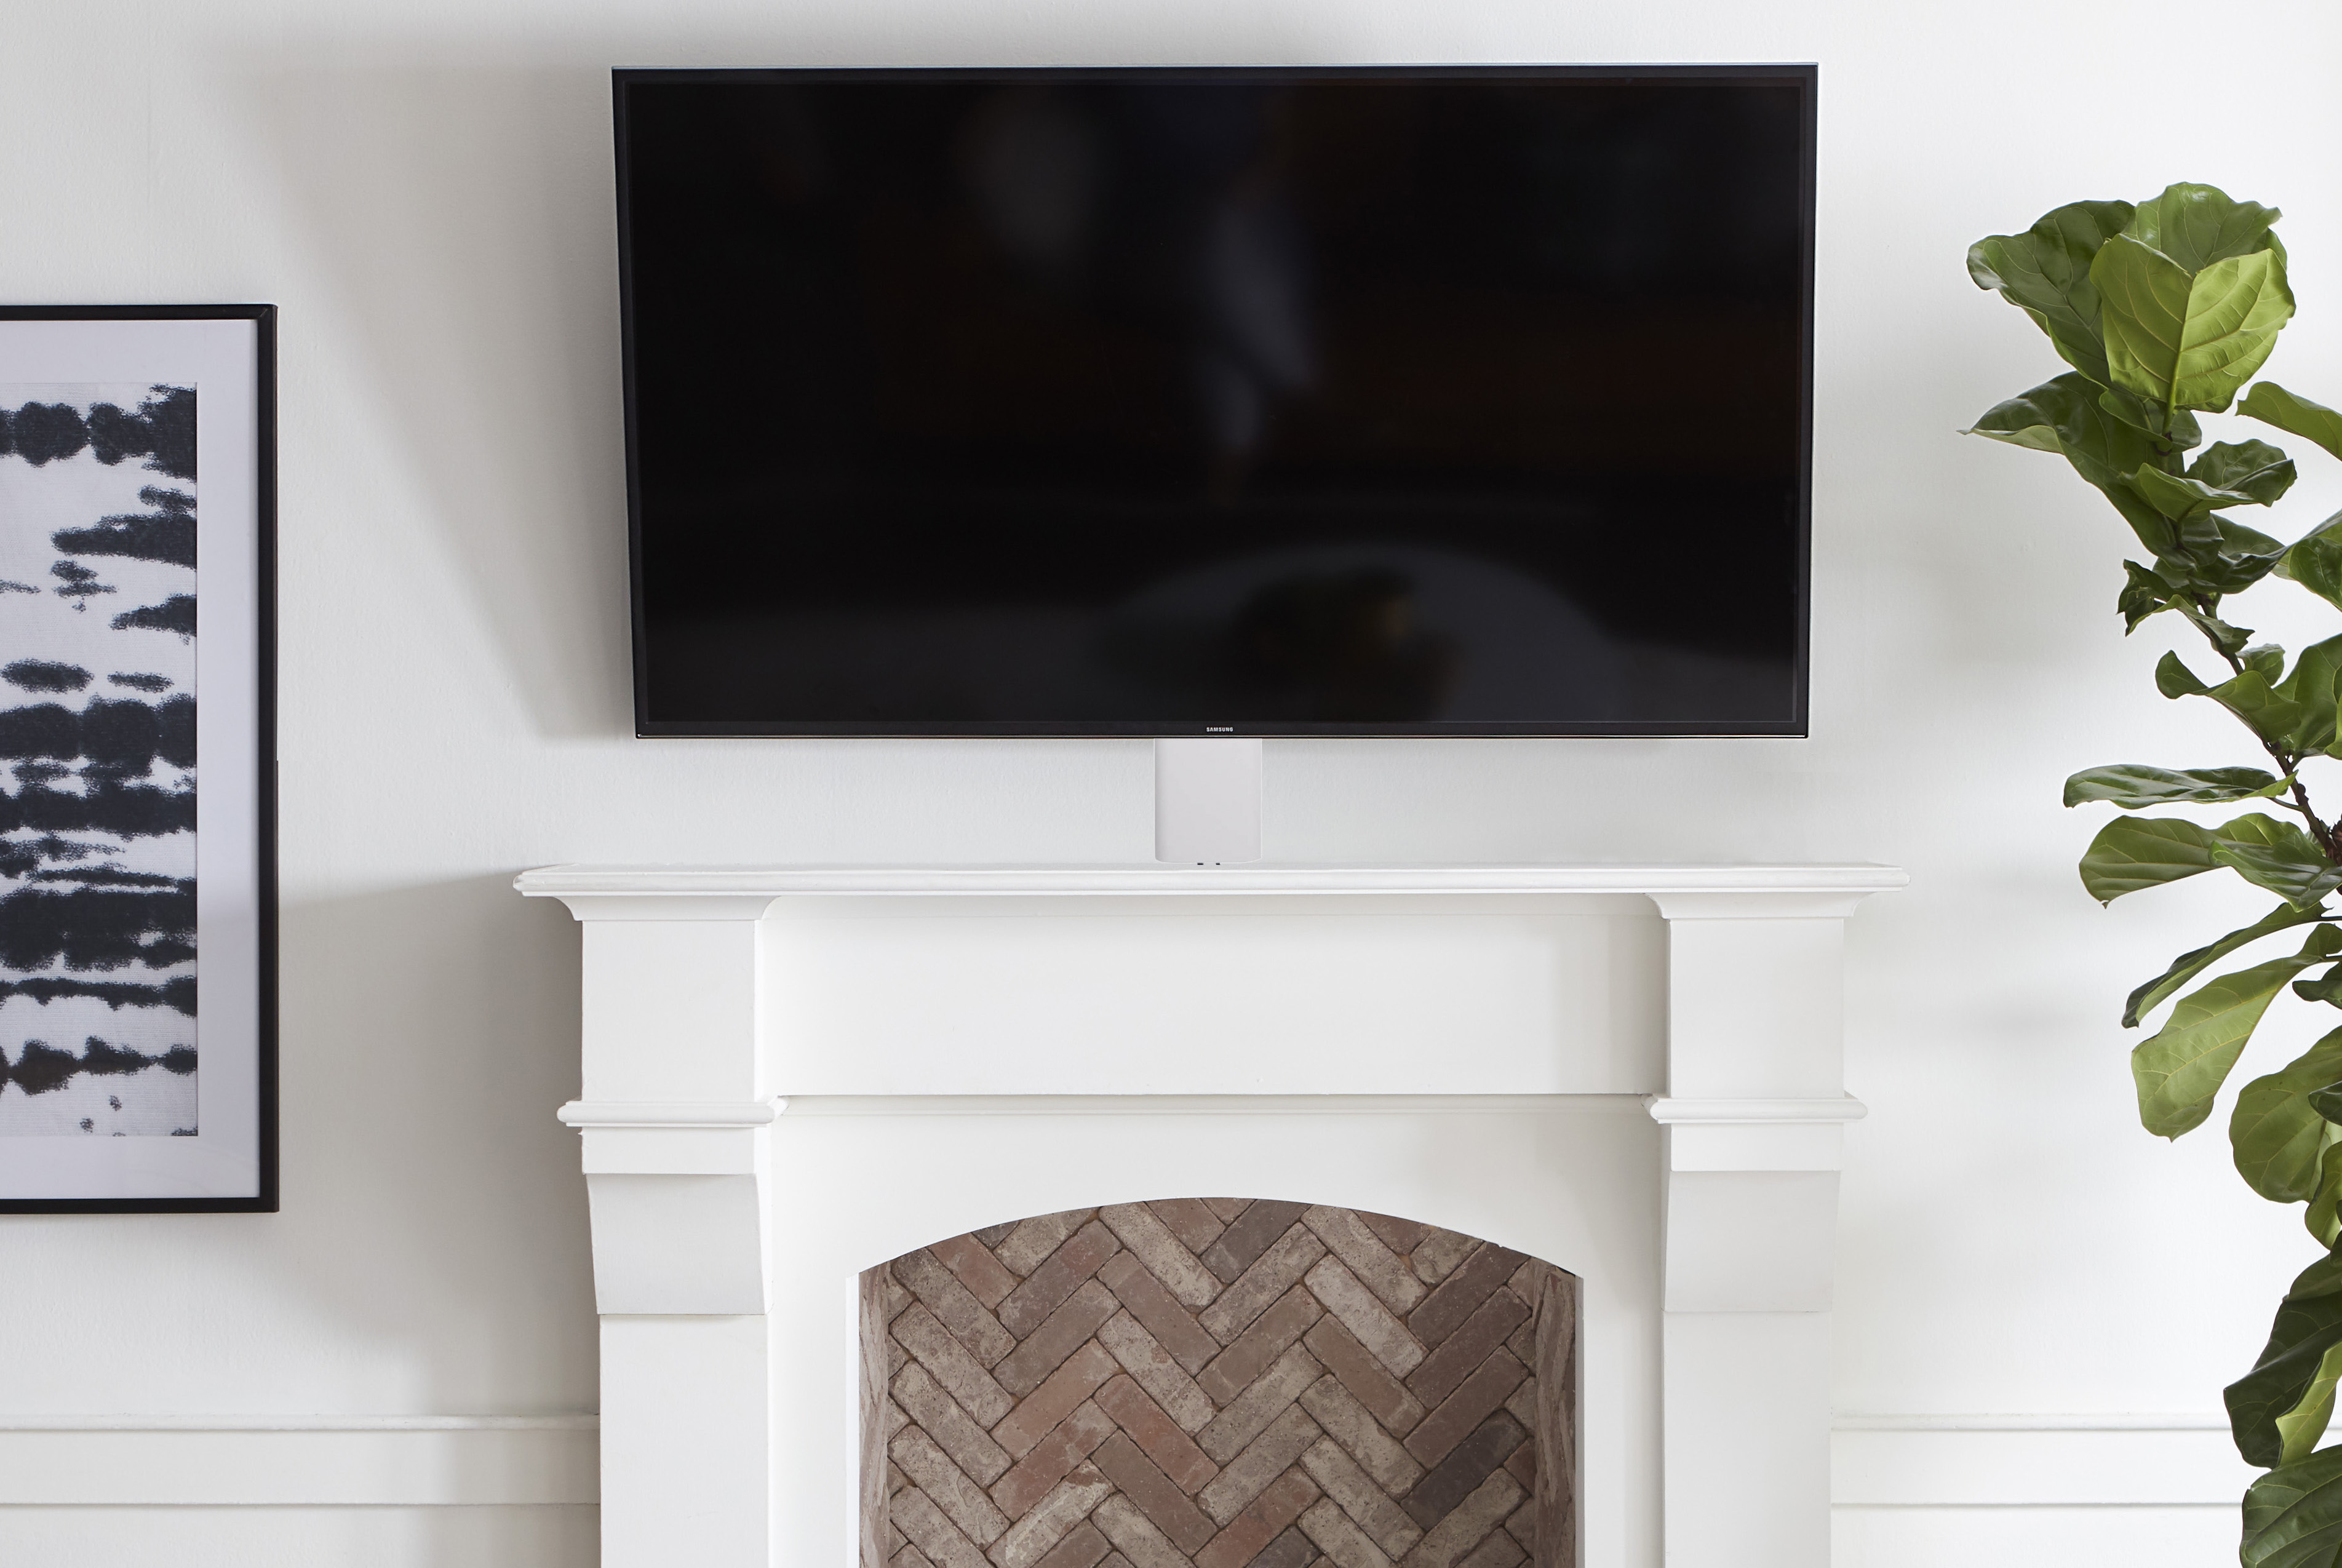 Mounting A Tv Over Fireplace How, How To Mount A Tv Above Fireplace With No Studs